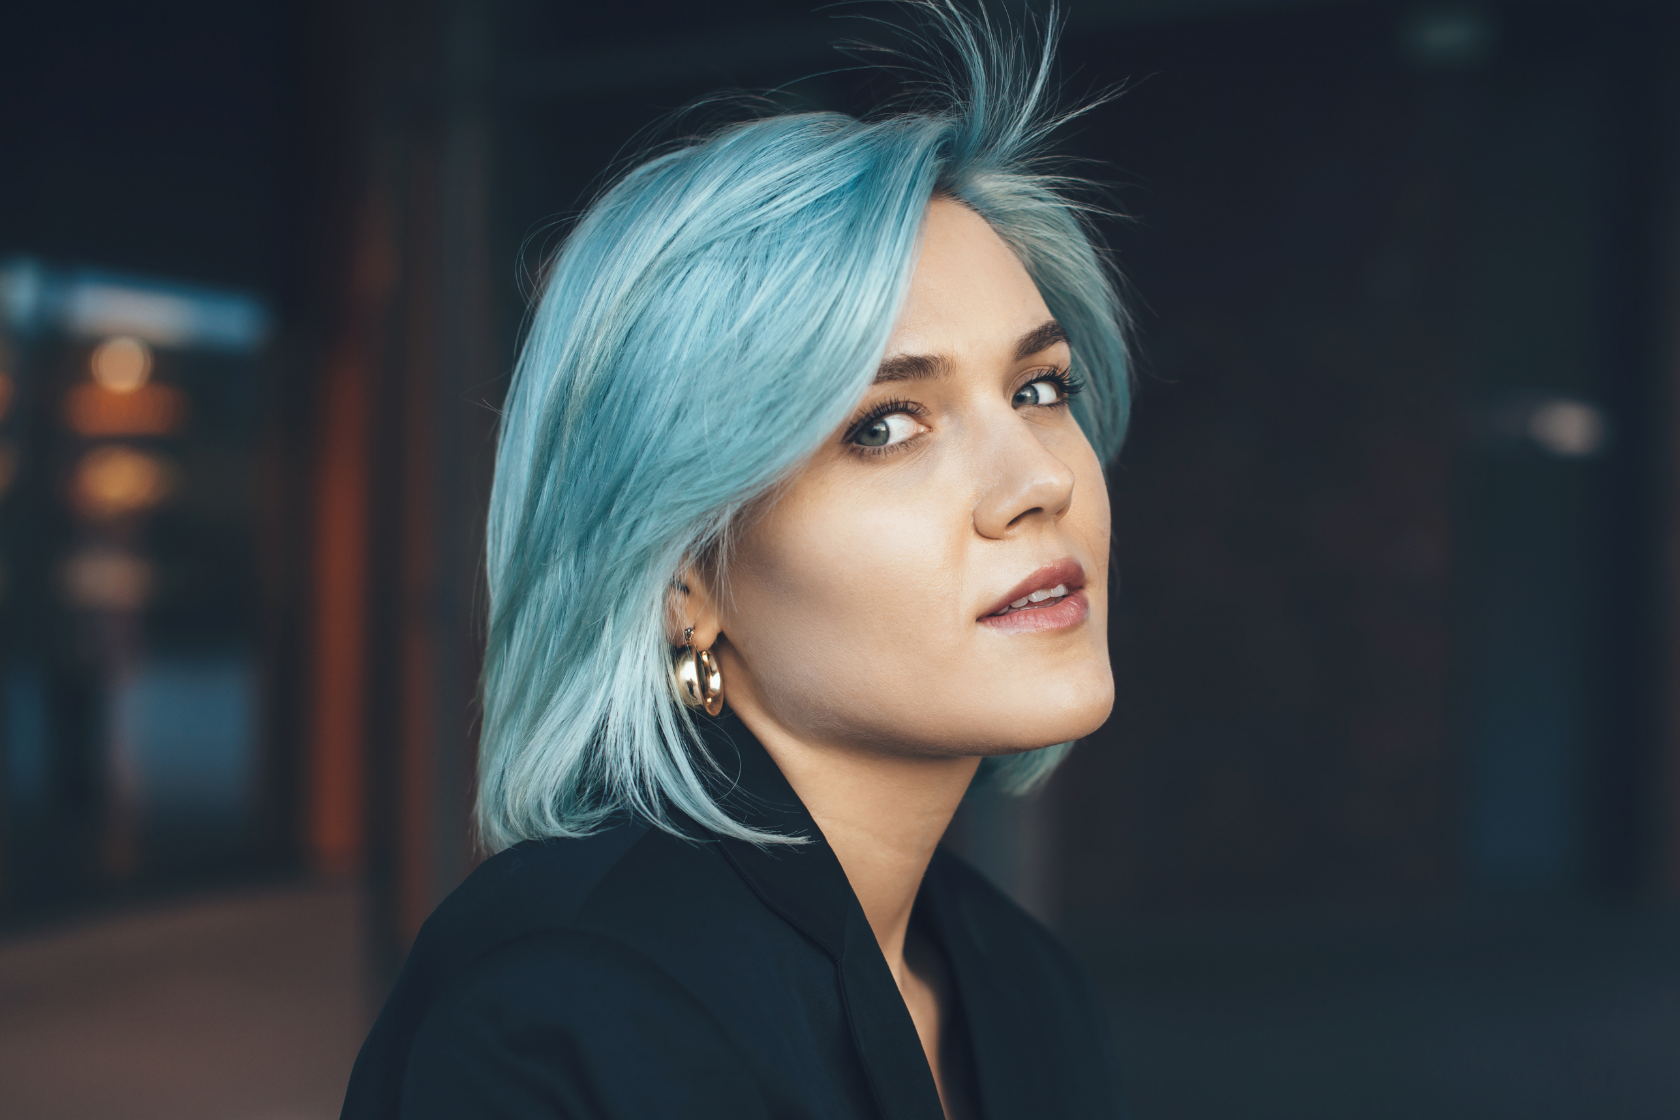 3. "How to Achieve the Perfect Blue Hair Look for 2021" - wide 1